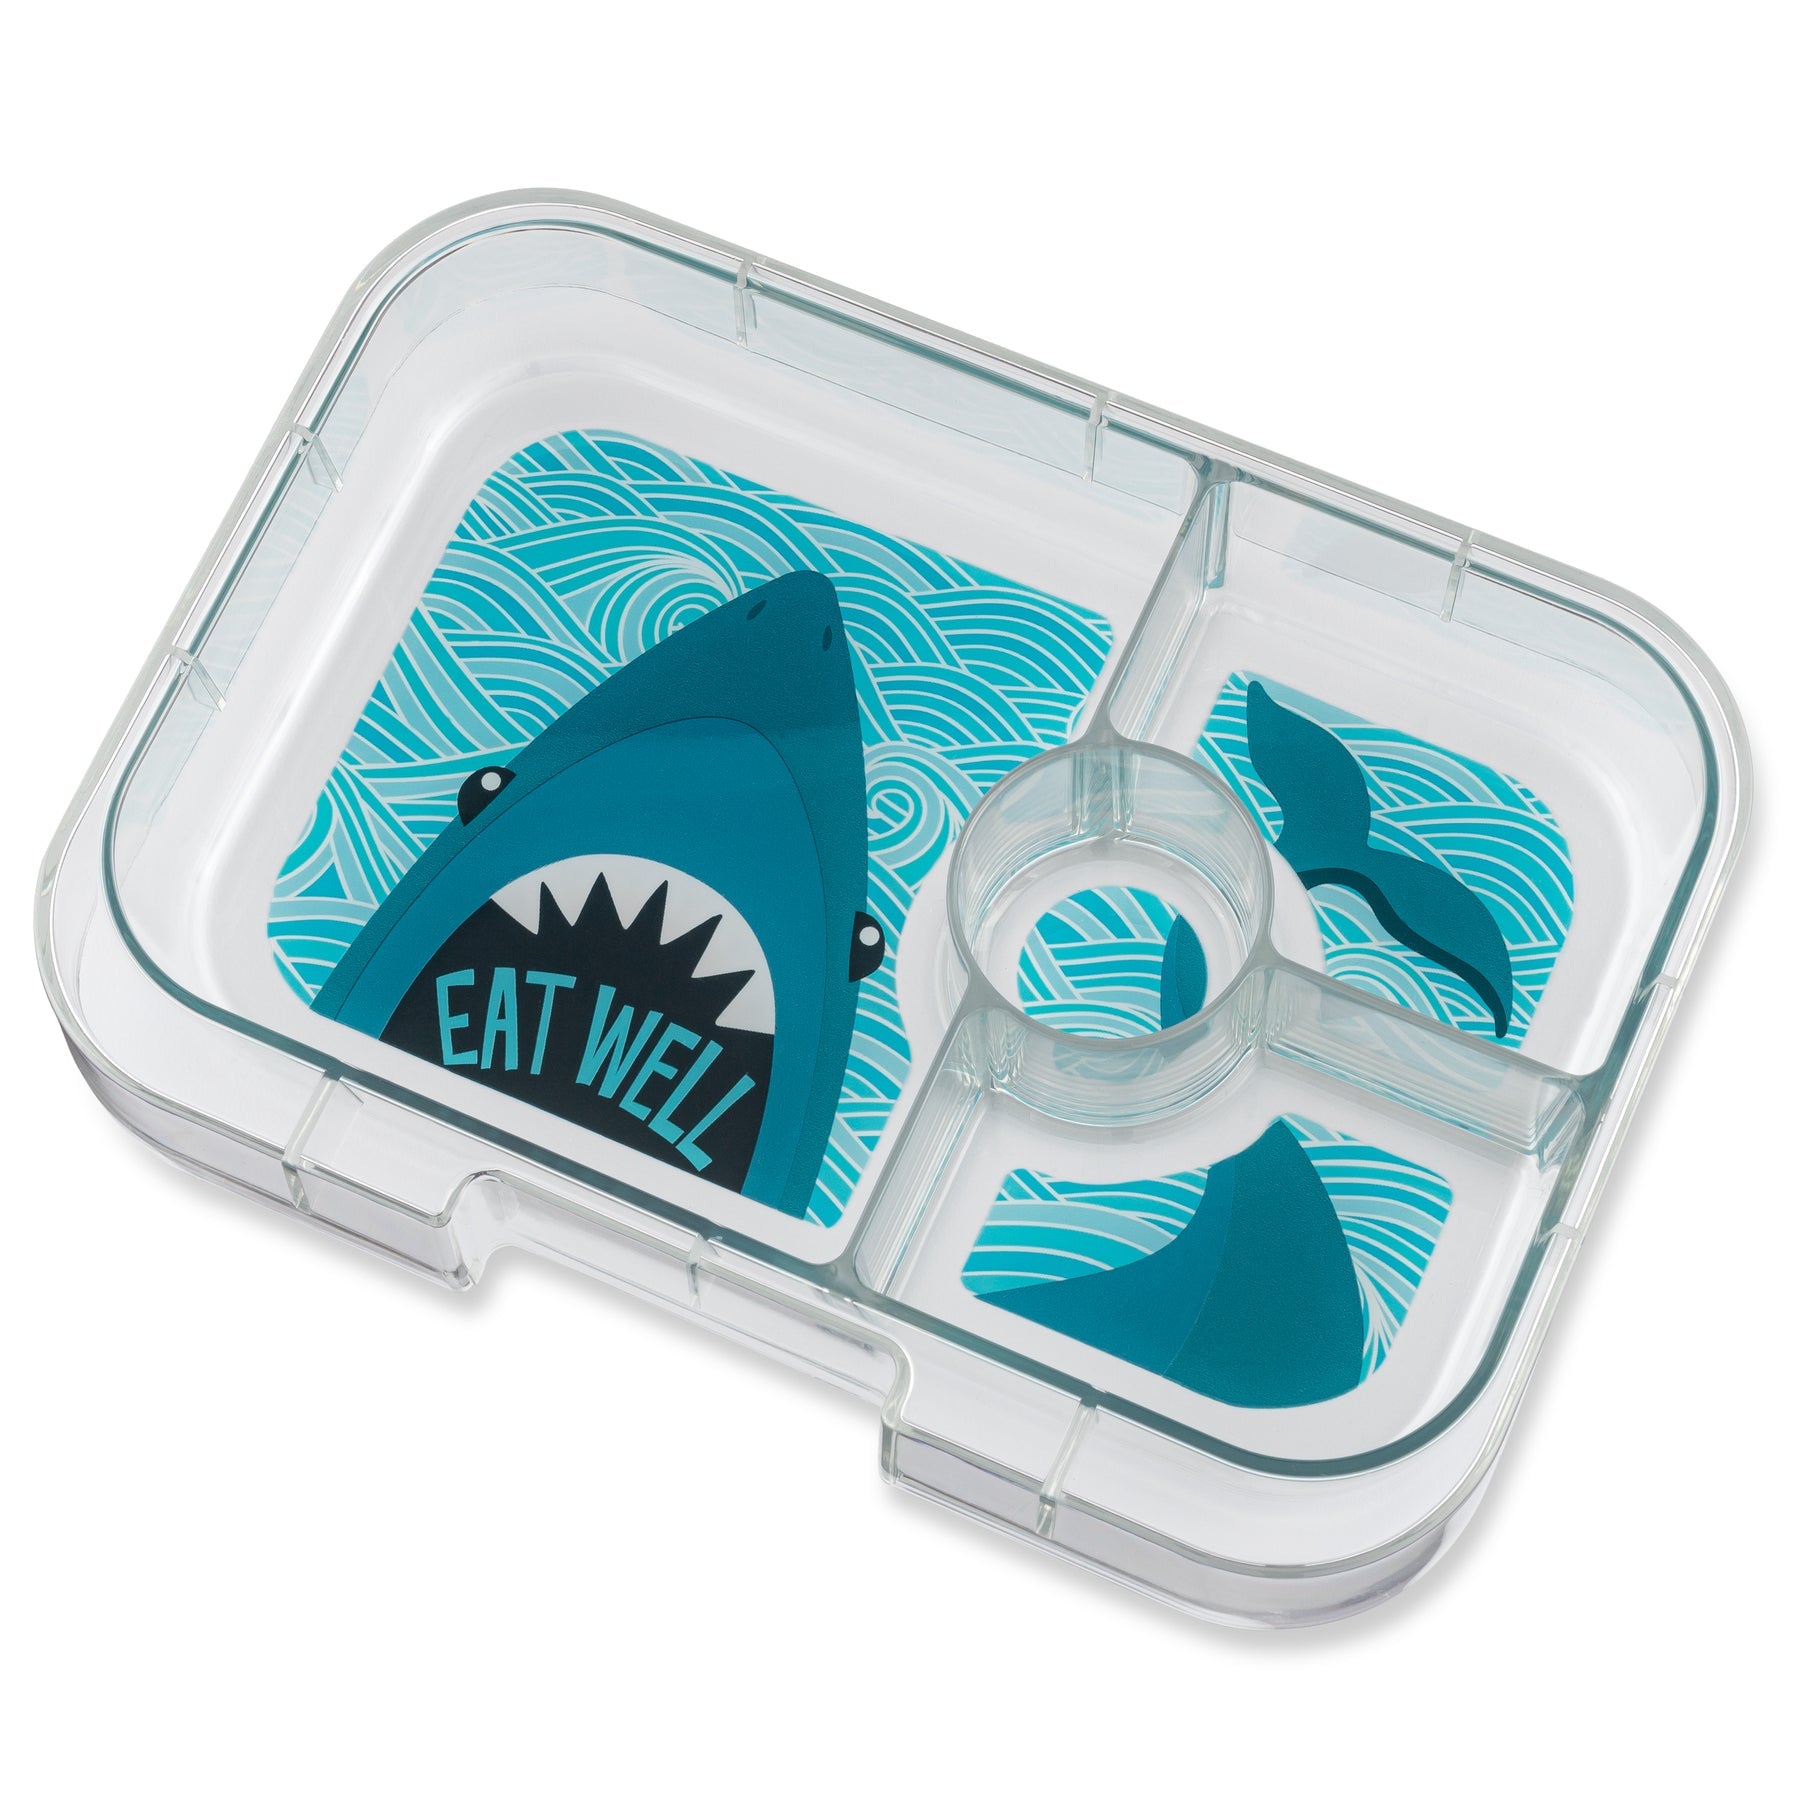 Yumbox – Panino – Wow Red avec plateau requin (4 compartiments)    - Yumbox - Boîte à repas - 